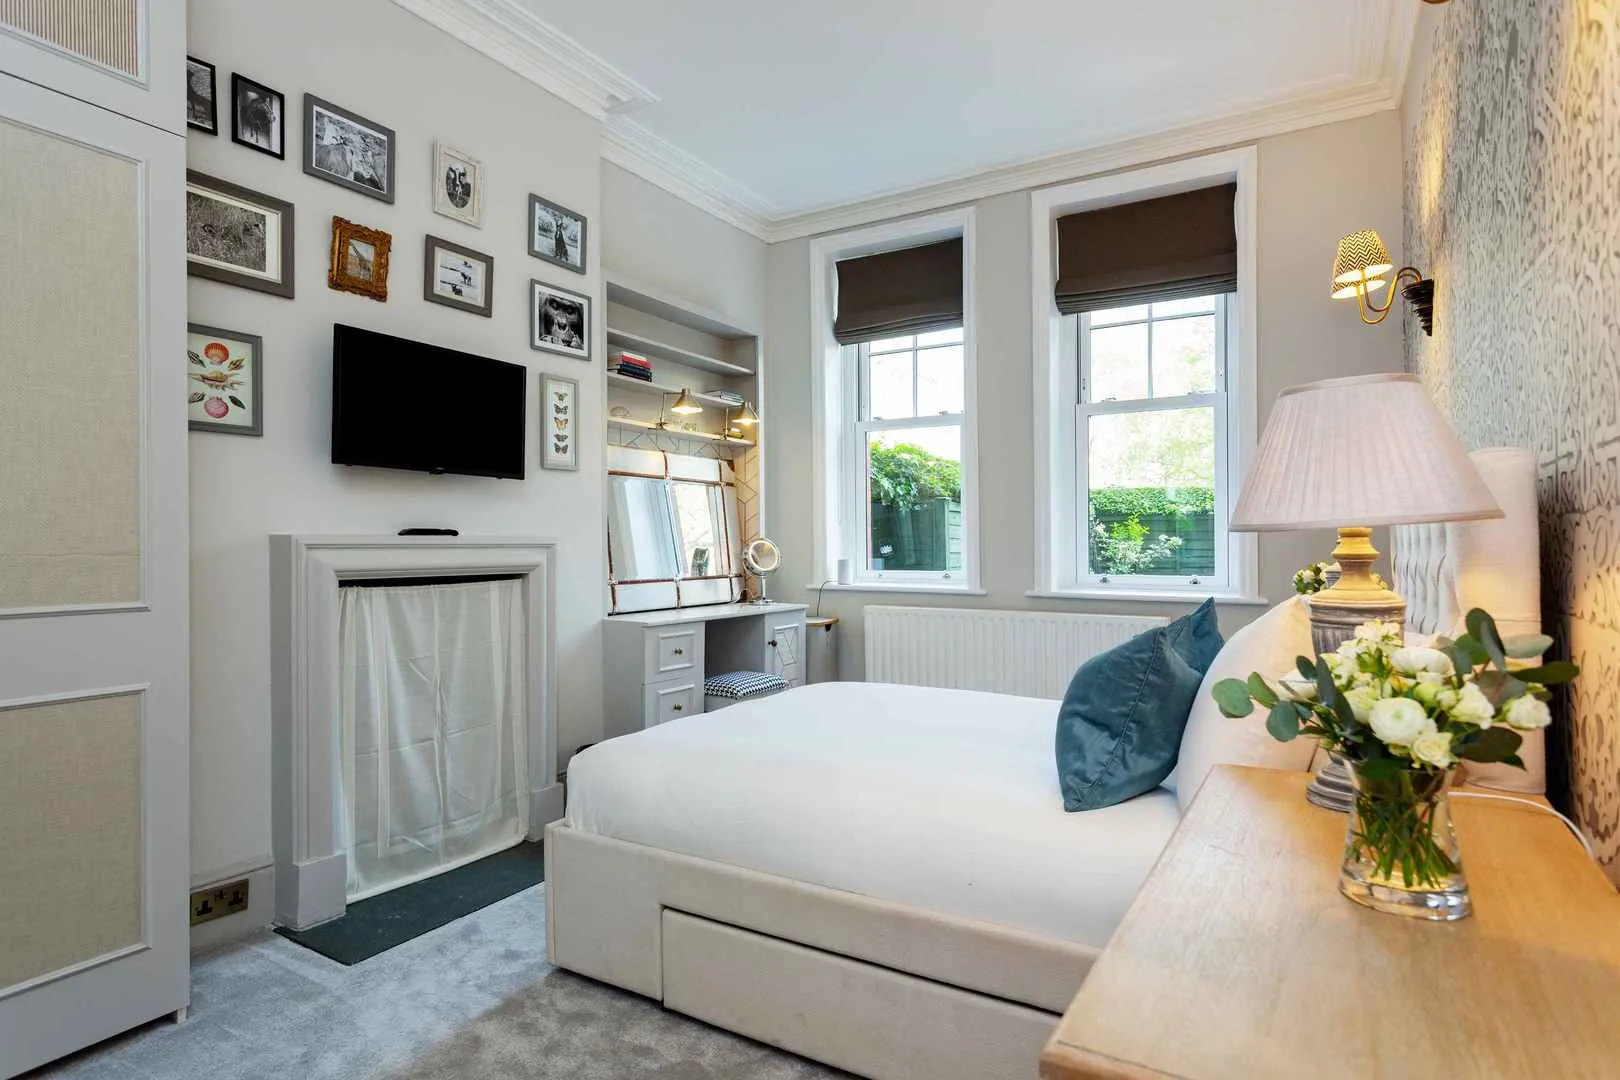 Prince of Wales Drive, holiday home in Battersea, London